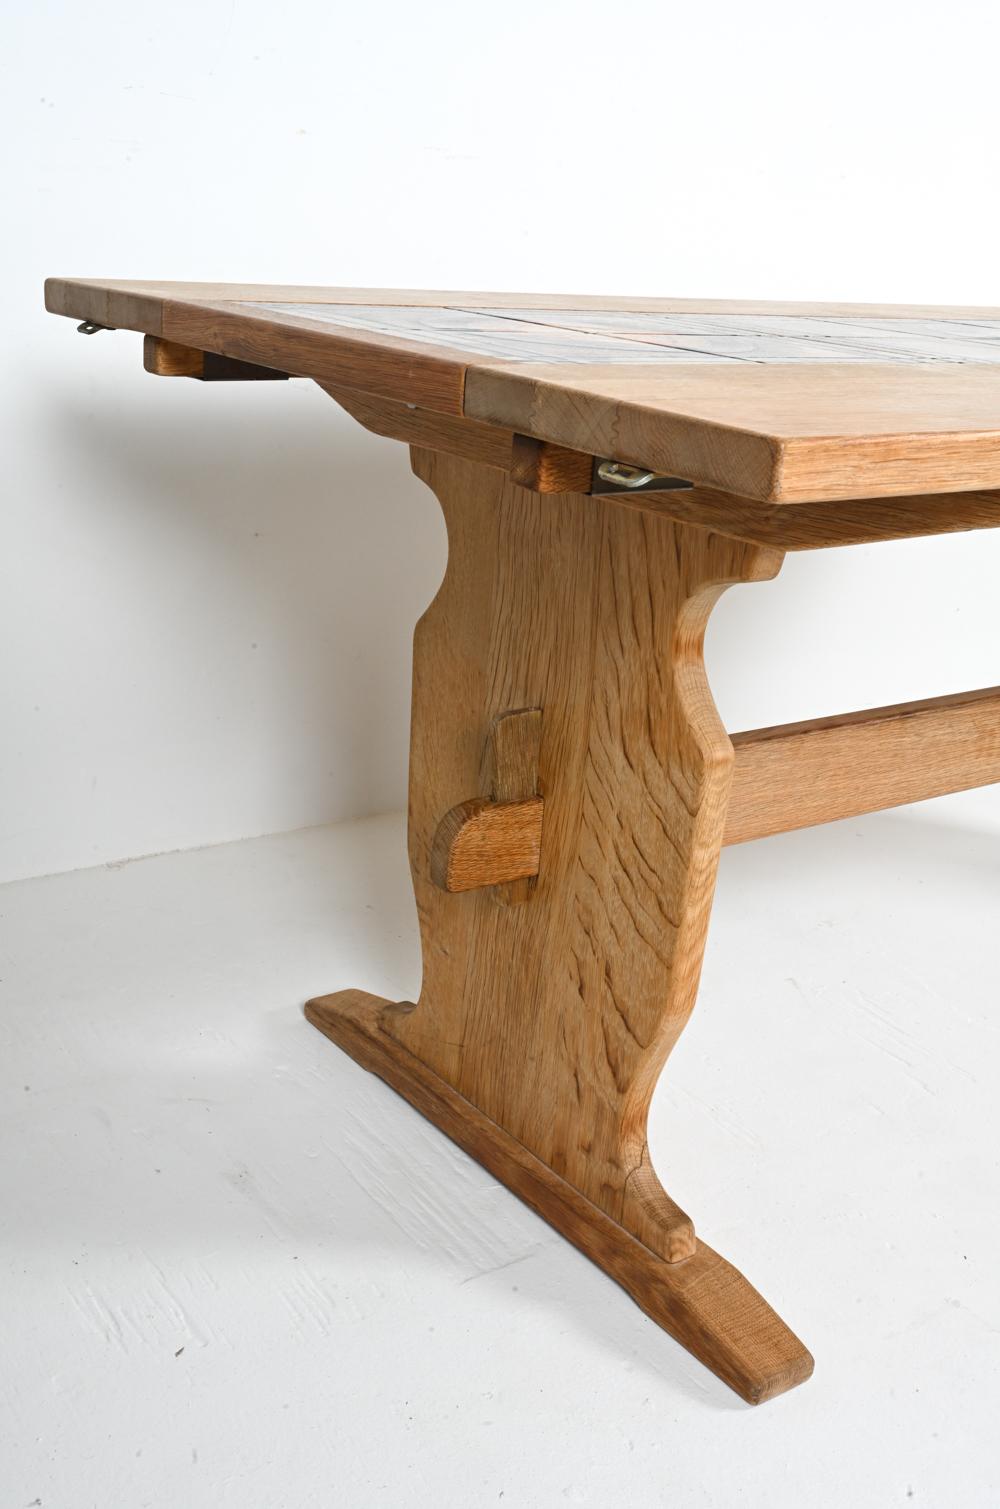 Danish Ox Art Oak & Ceramic Tile Mosaic-Top Dining Table With Leaves, c. 1970's For Sale 3